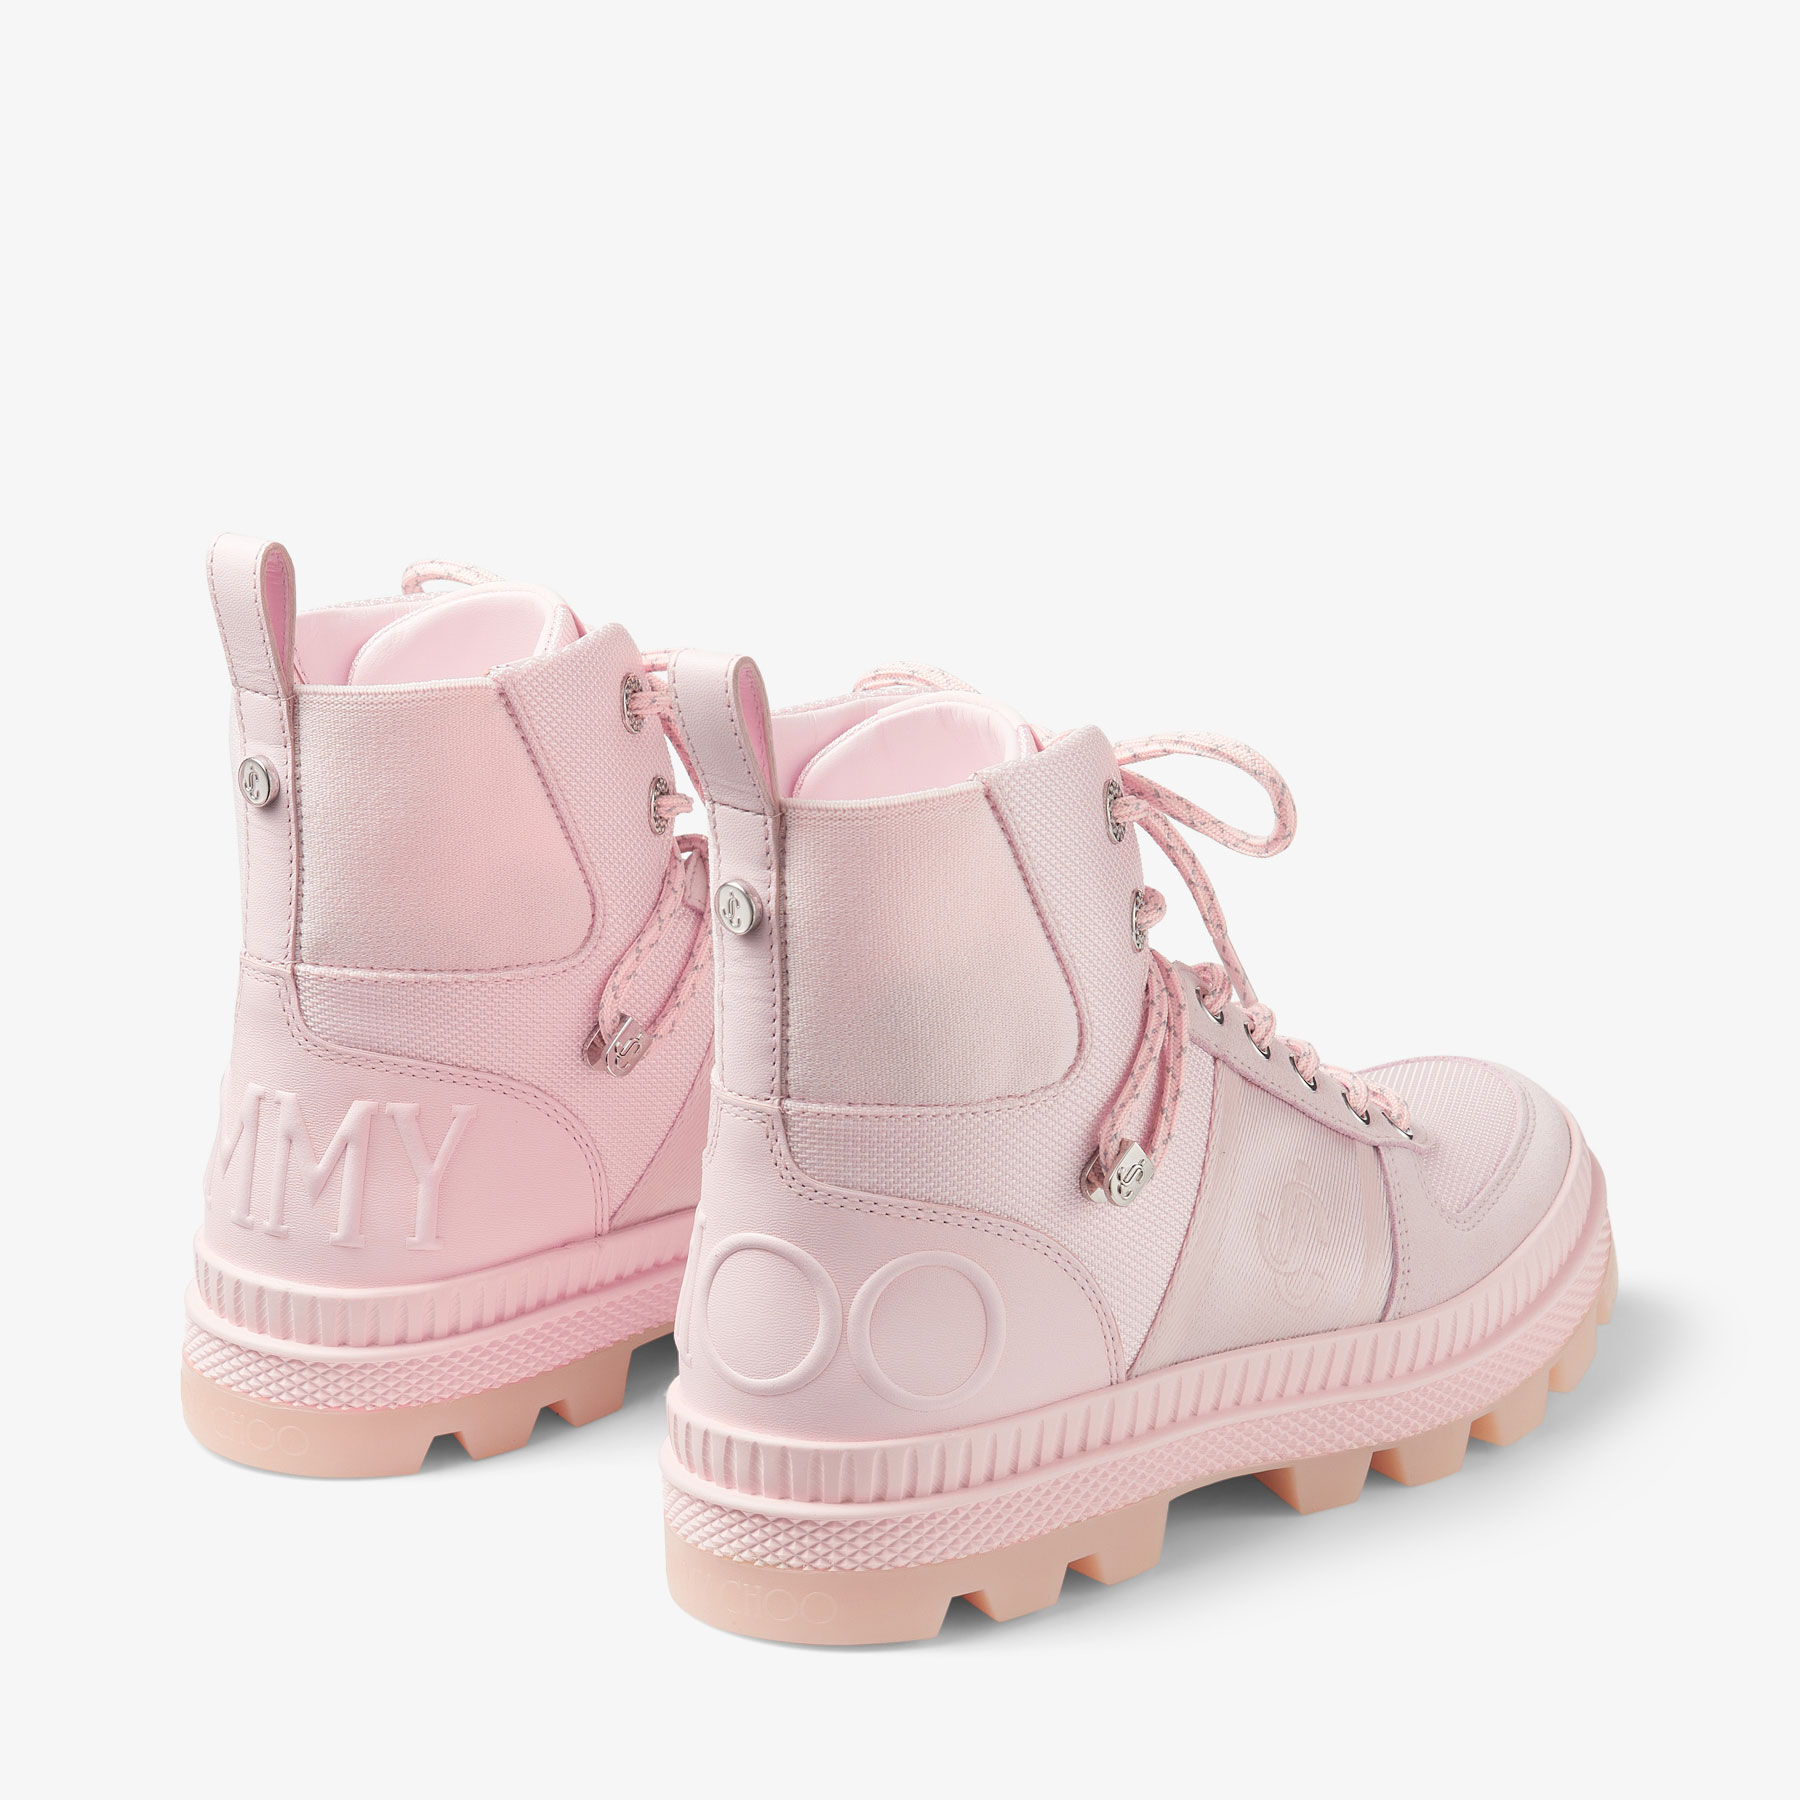 NORMANDY/F, Powder Pink Nylon and Leather Boots, Autumn Collection